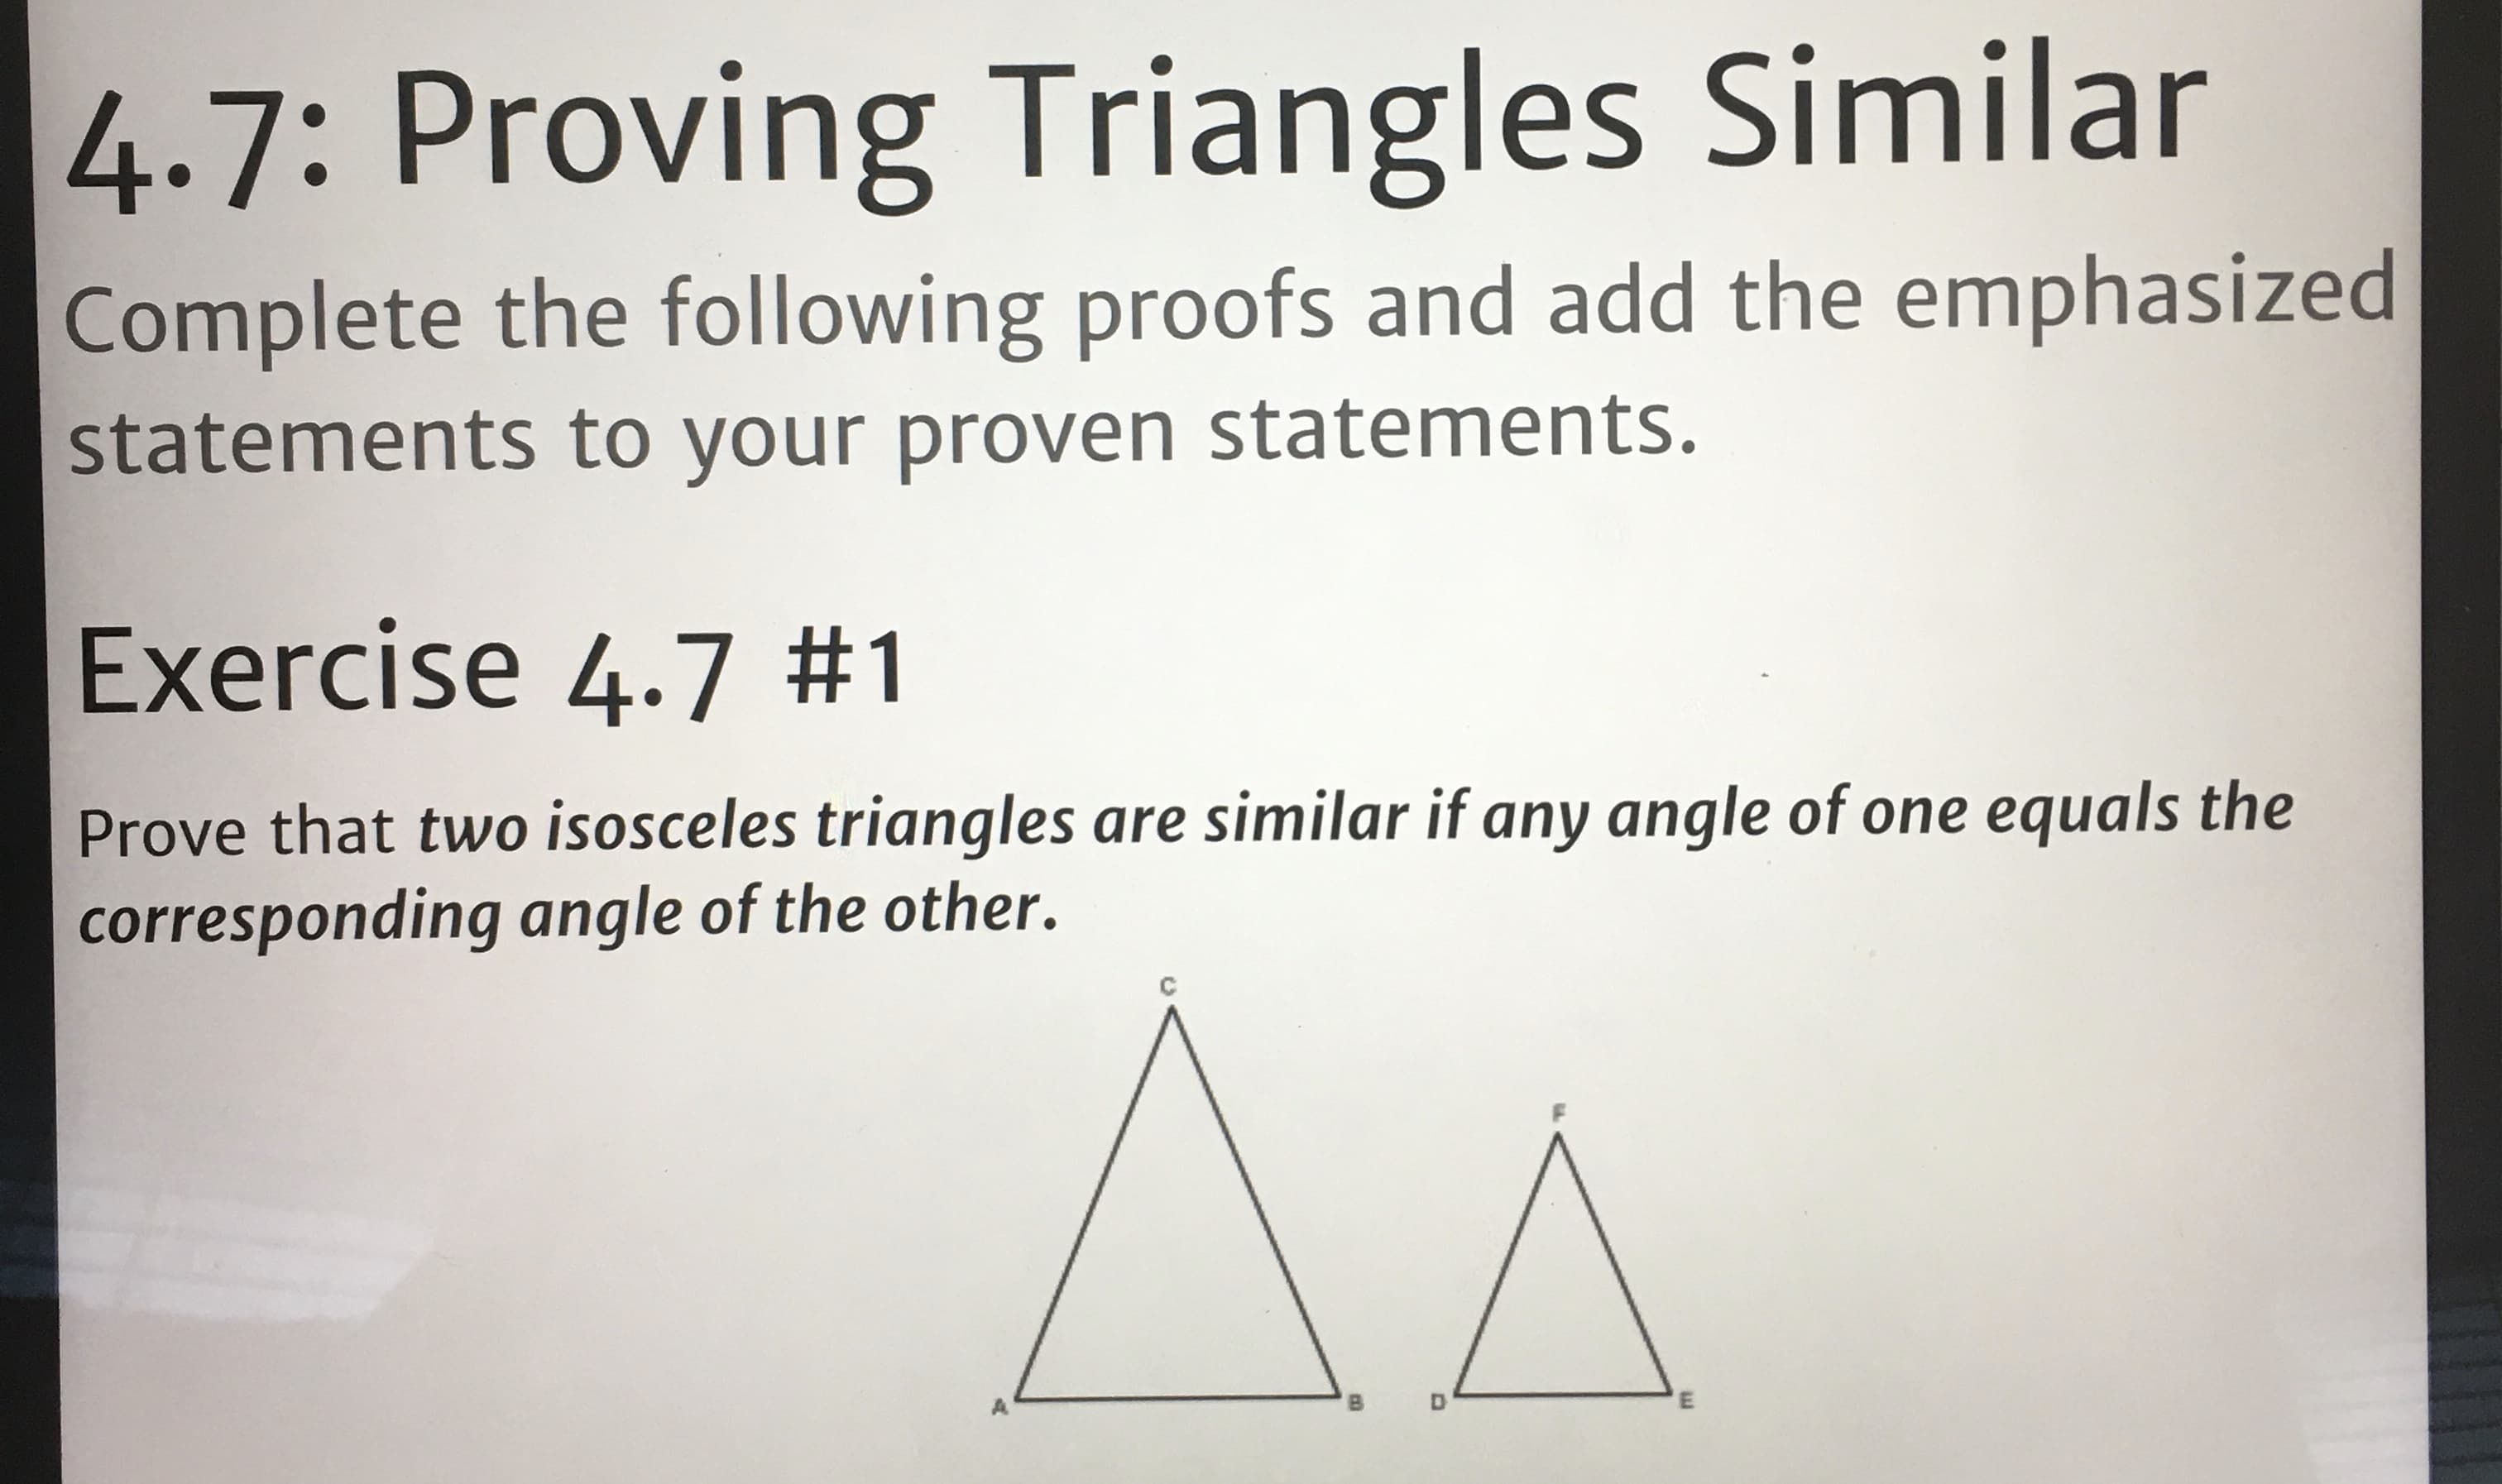 4.7: Proving Triangles Similar
Complete the following proofs and add the emphasized
statements to your proven statements.
Exercise 4.7 #1
Prove that two isosceles triangles are similar if any angle of one equals the
corresponding angle of the other.
A.
B.
